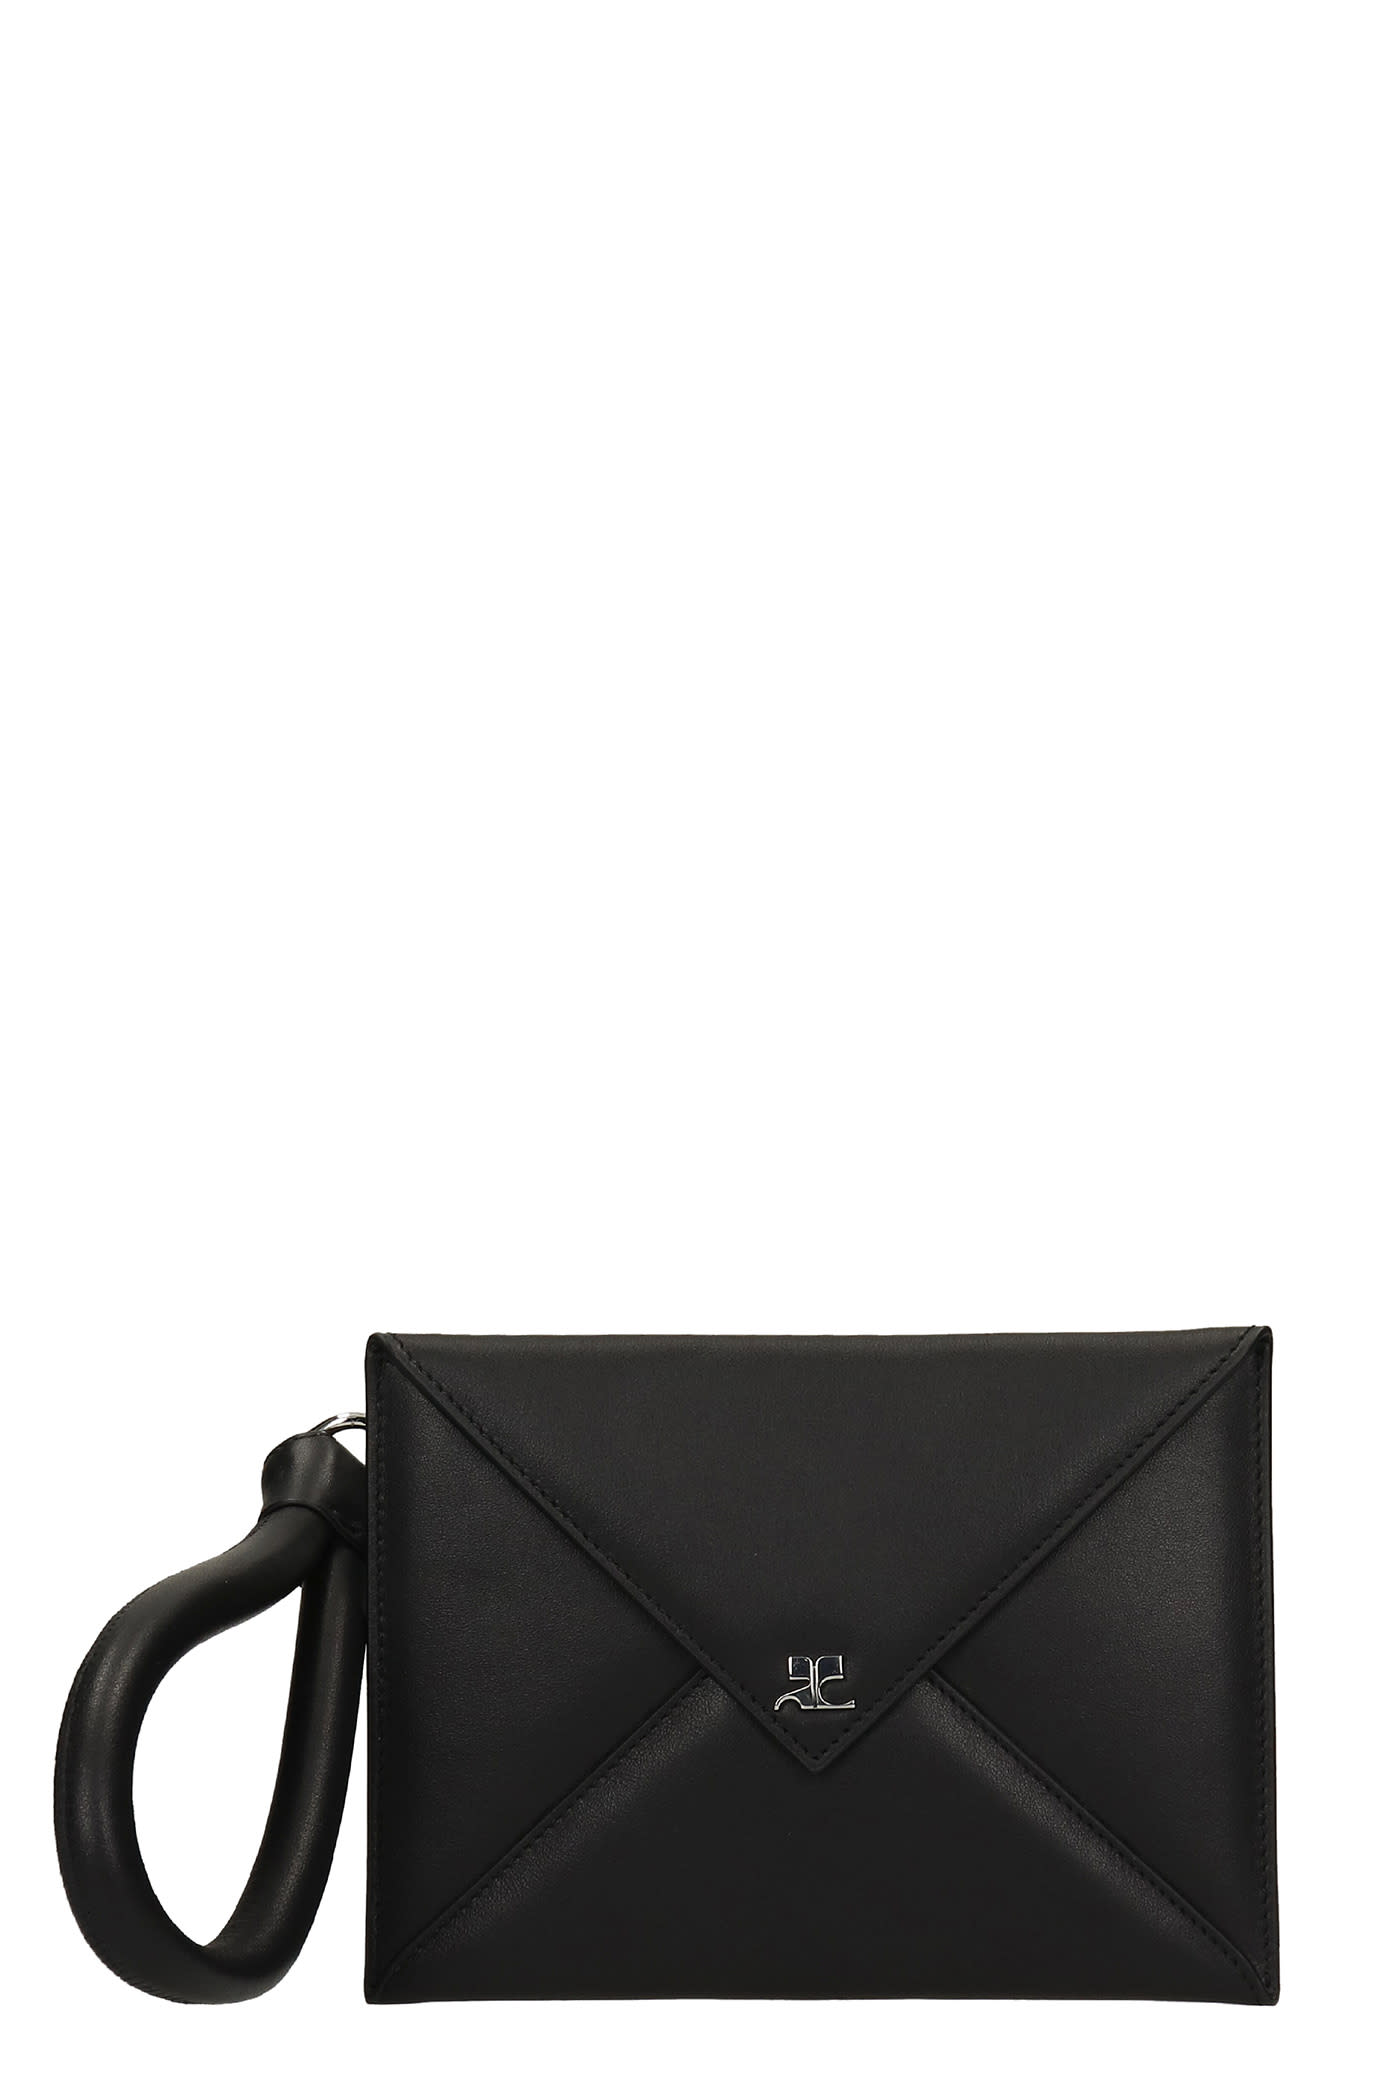 Courrèges Clutch In Black Leather